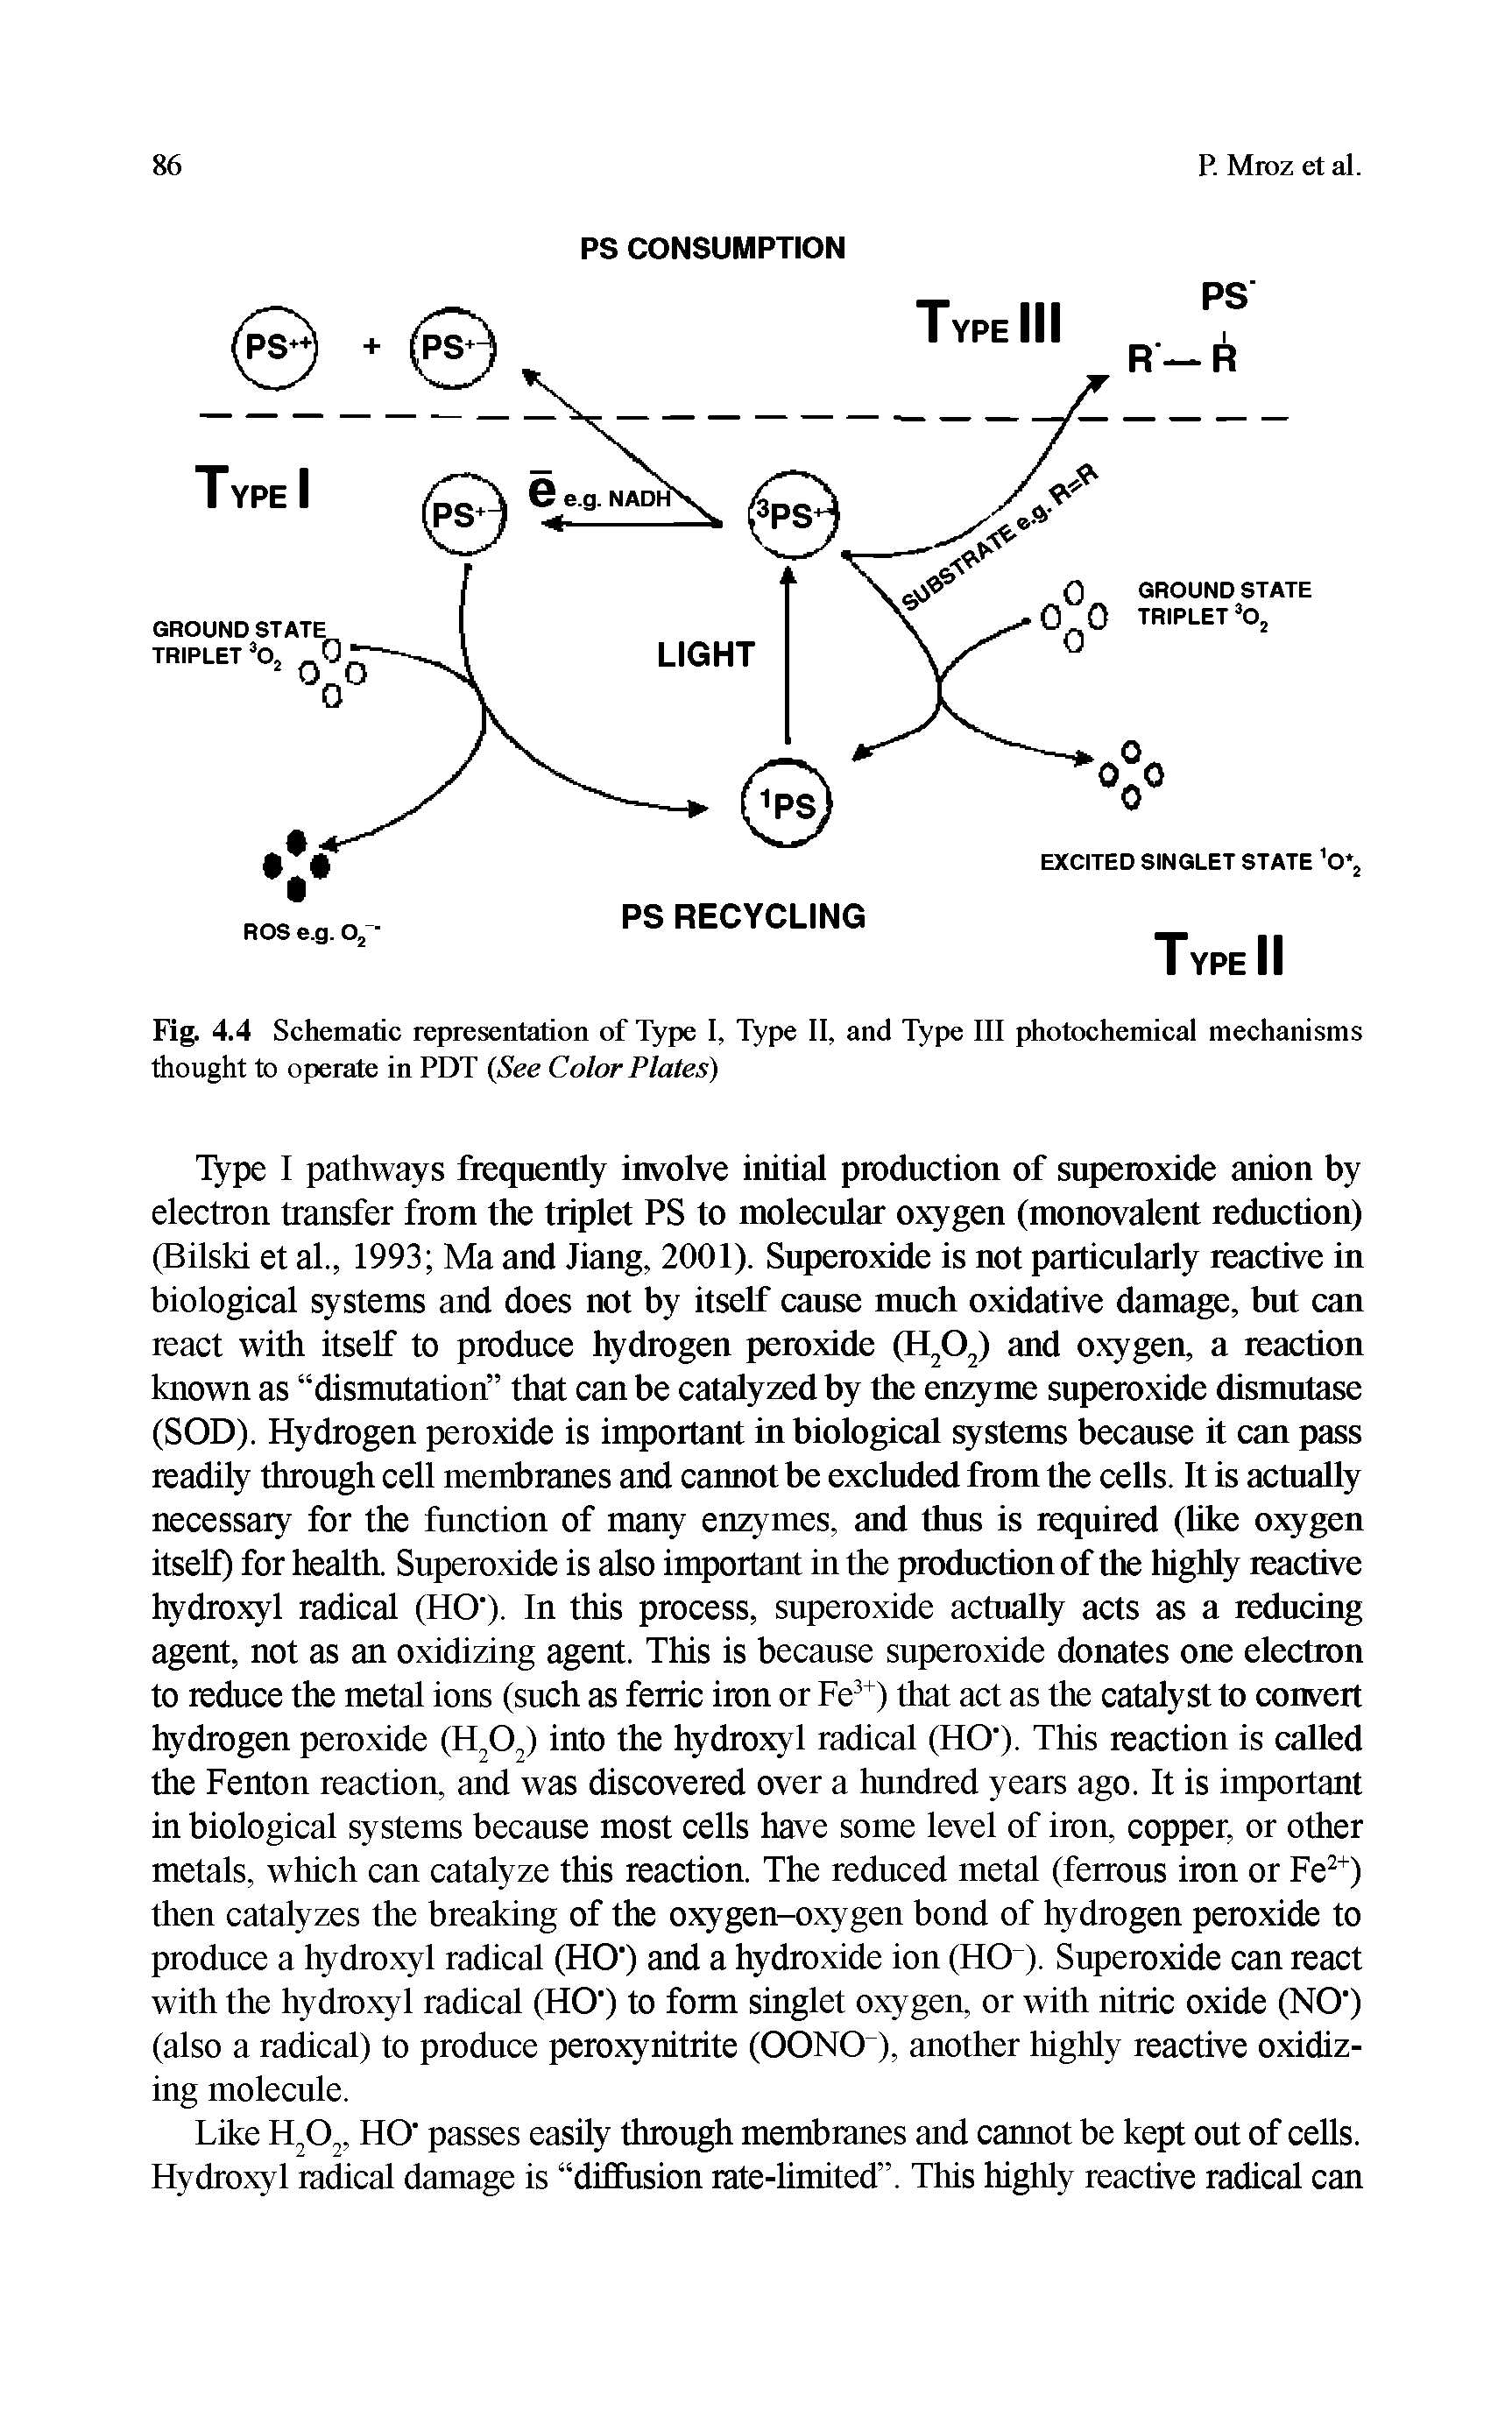 Fig. 4.4 Schematic representation of Type I, Type II, and Type III photochemical mechanisms thought to operate in PDT (See Color Plates)...